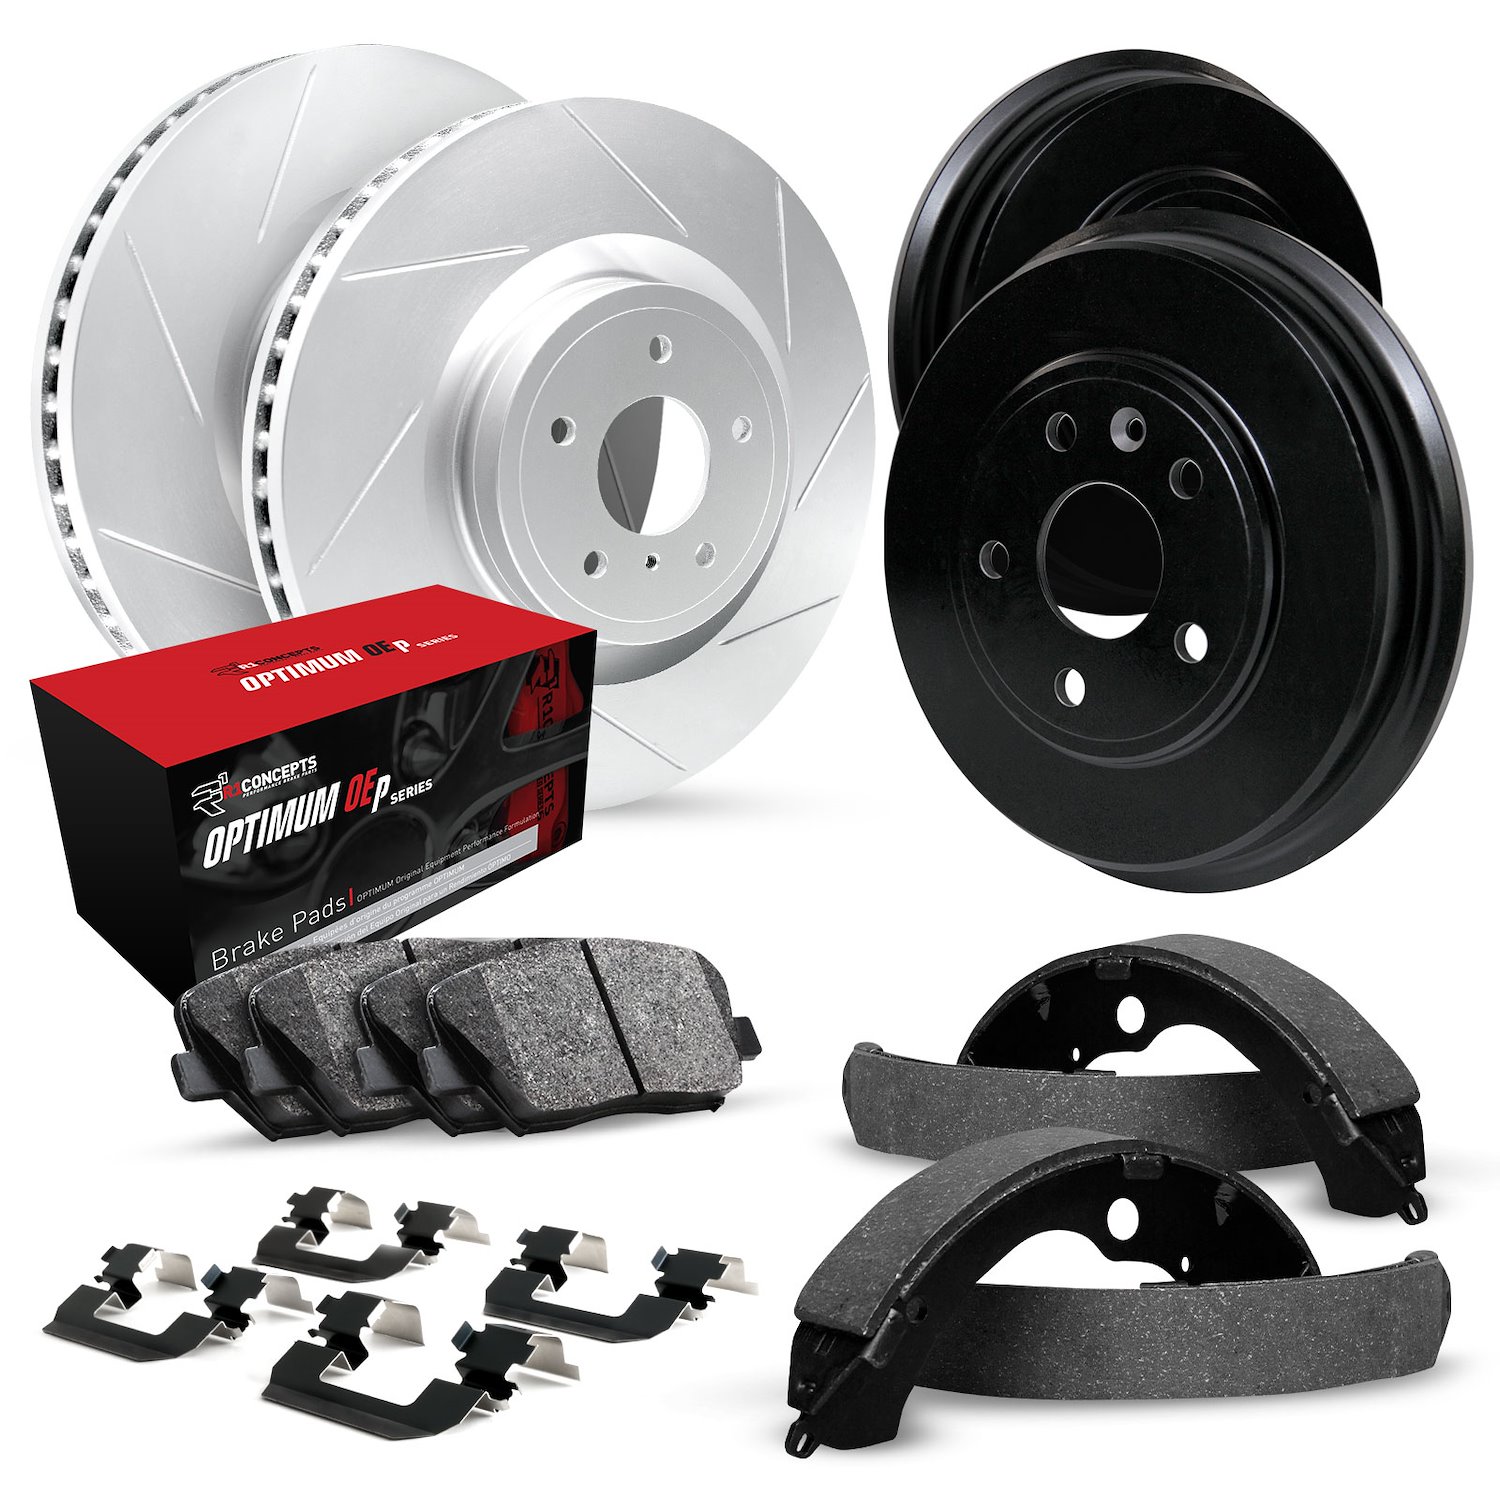 GEO-Carbon Slotted Brake Rotor & Drum Set w/Optimum OE Pads, Shoes, & Hardware, 1988-1999 GM, Position: Front & Rear